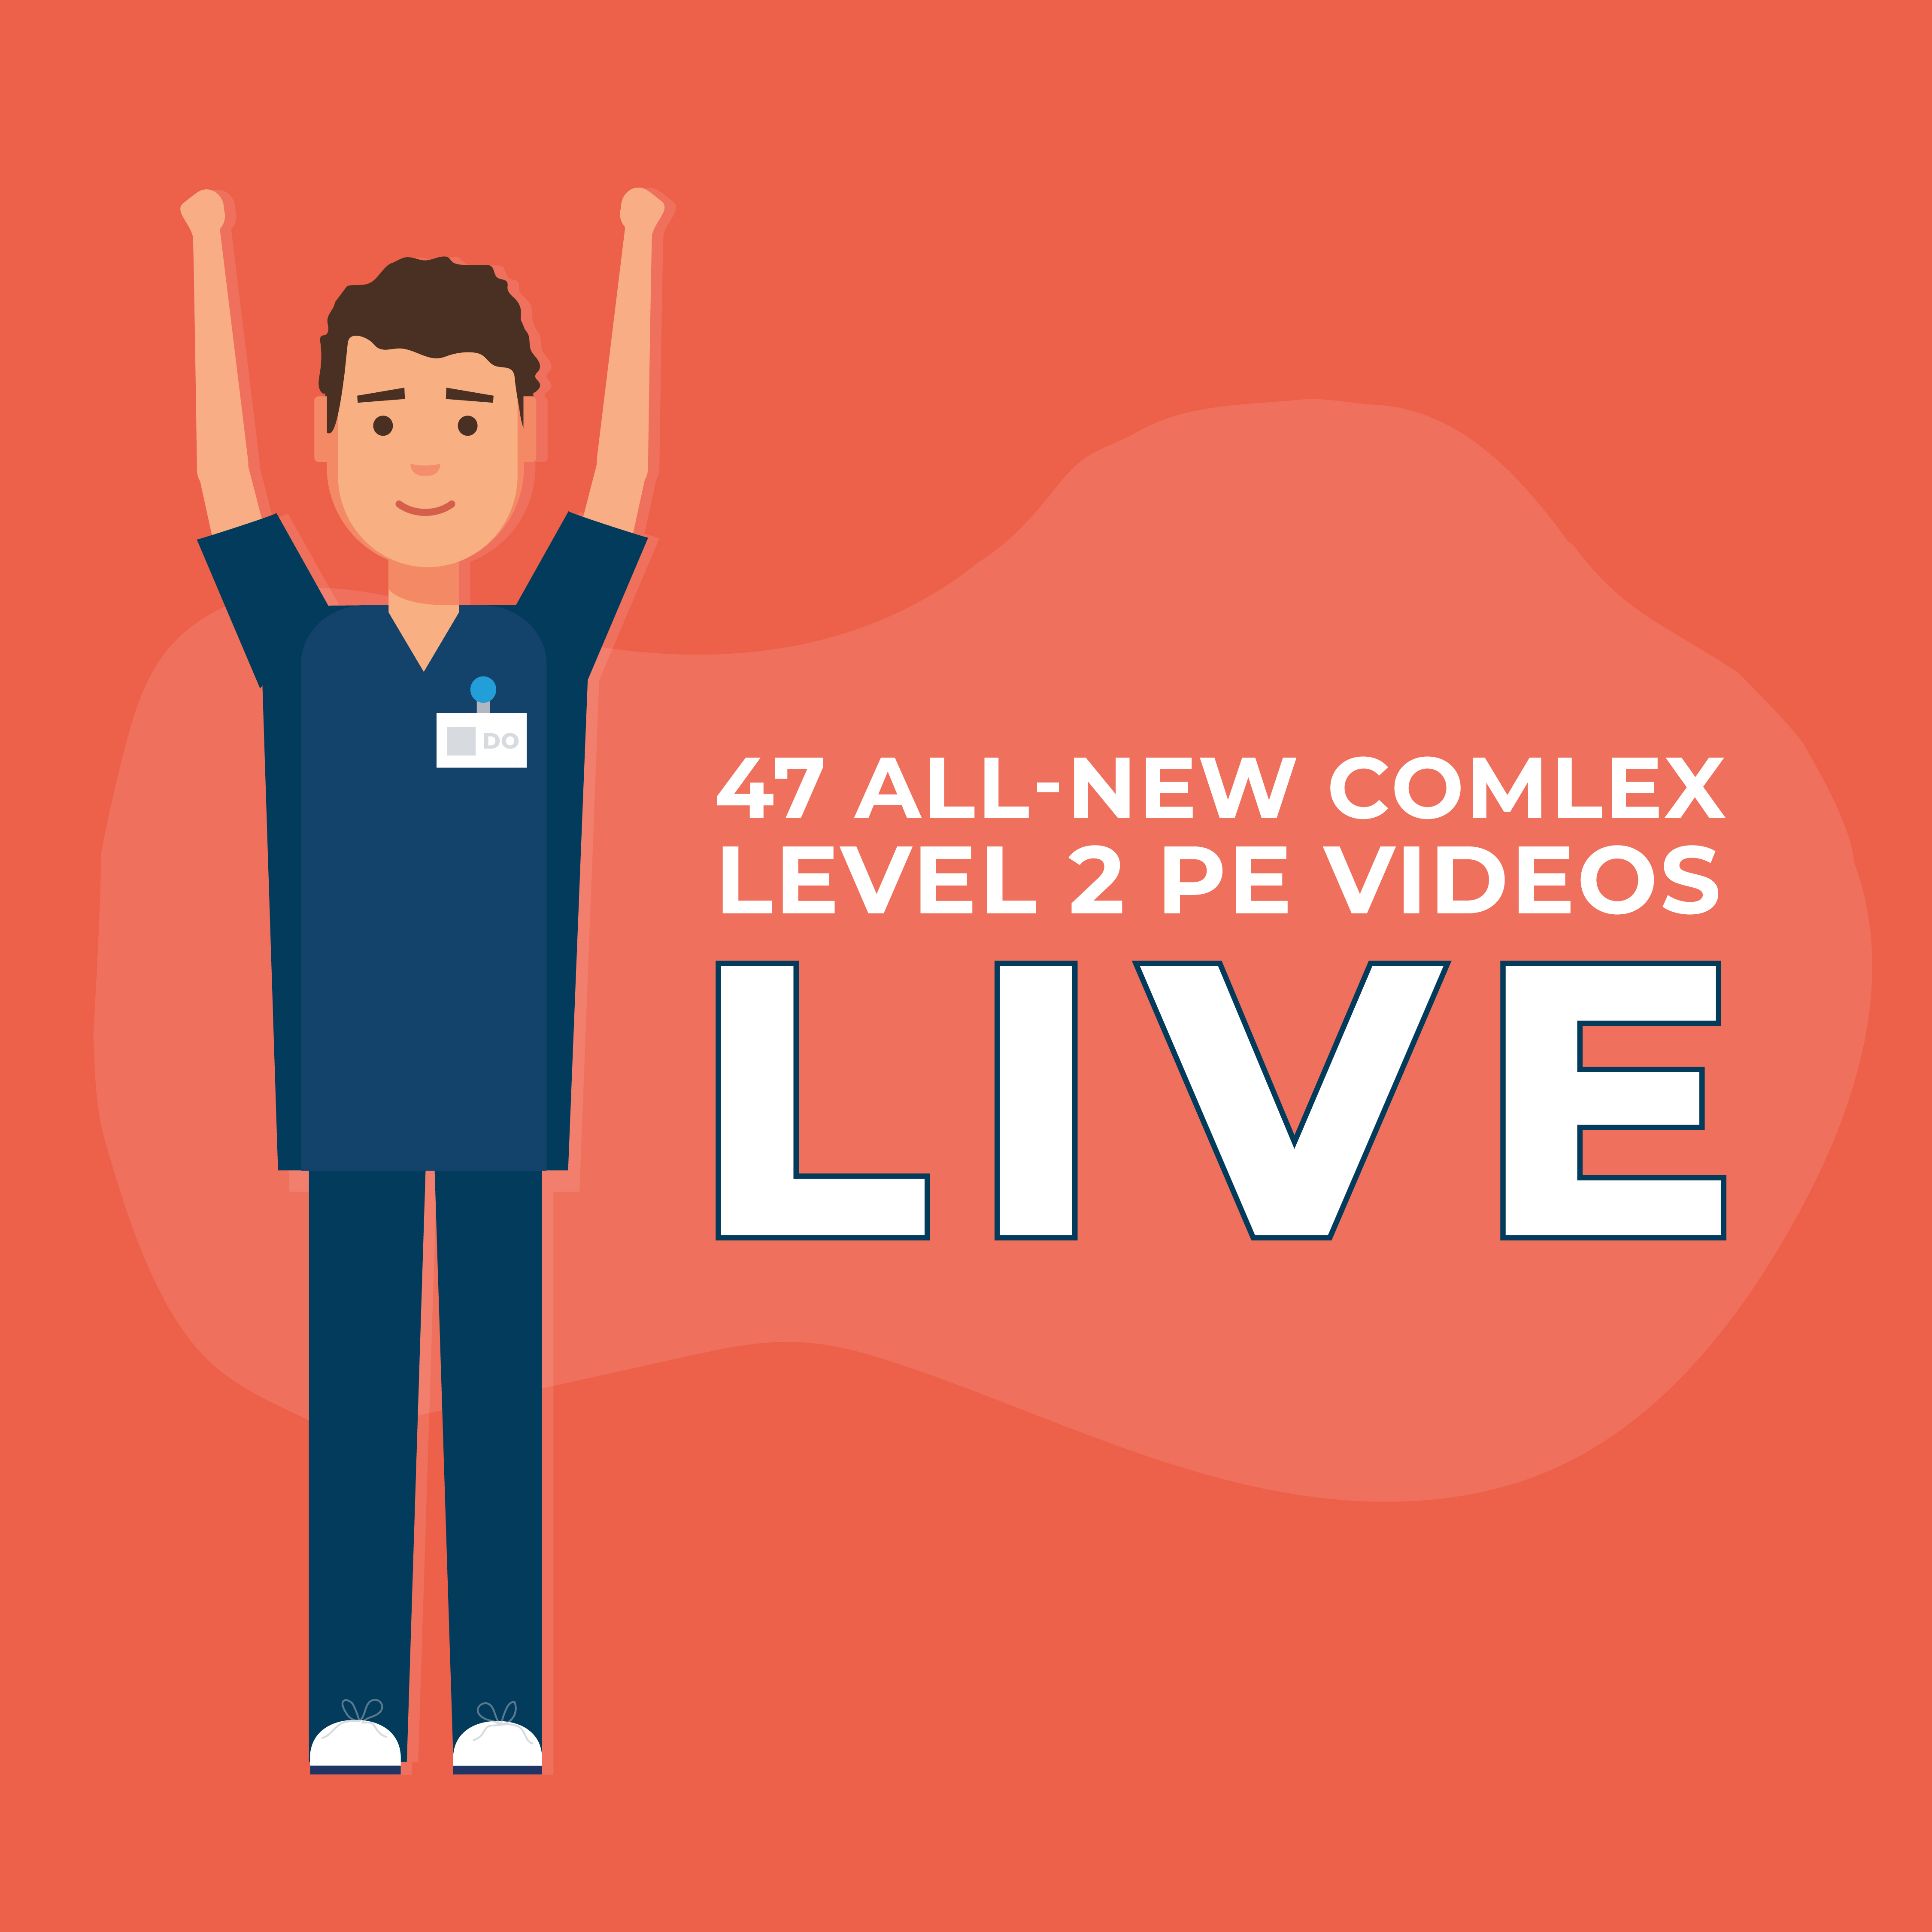 The NEW COMLEX Level 2 PE Video Series is Live!